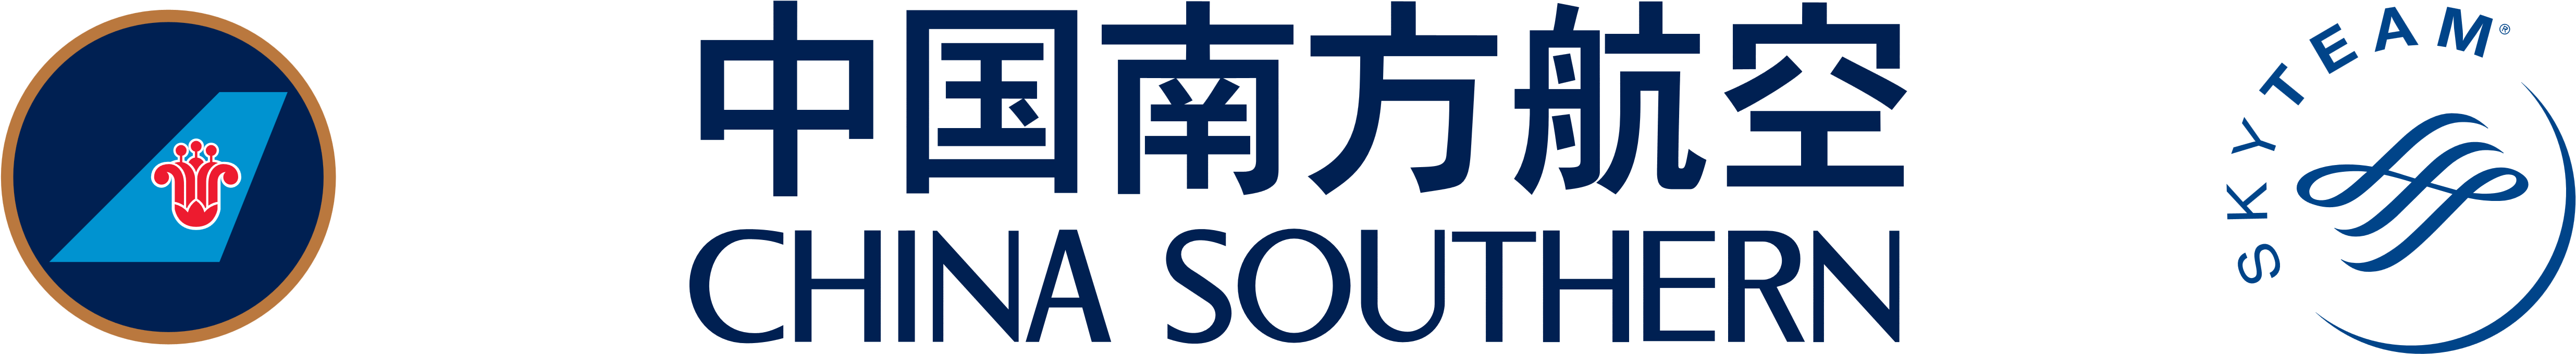 China Southern Airlines Logo - China Southern Airlines (5000x750)